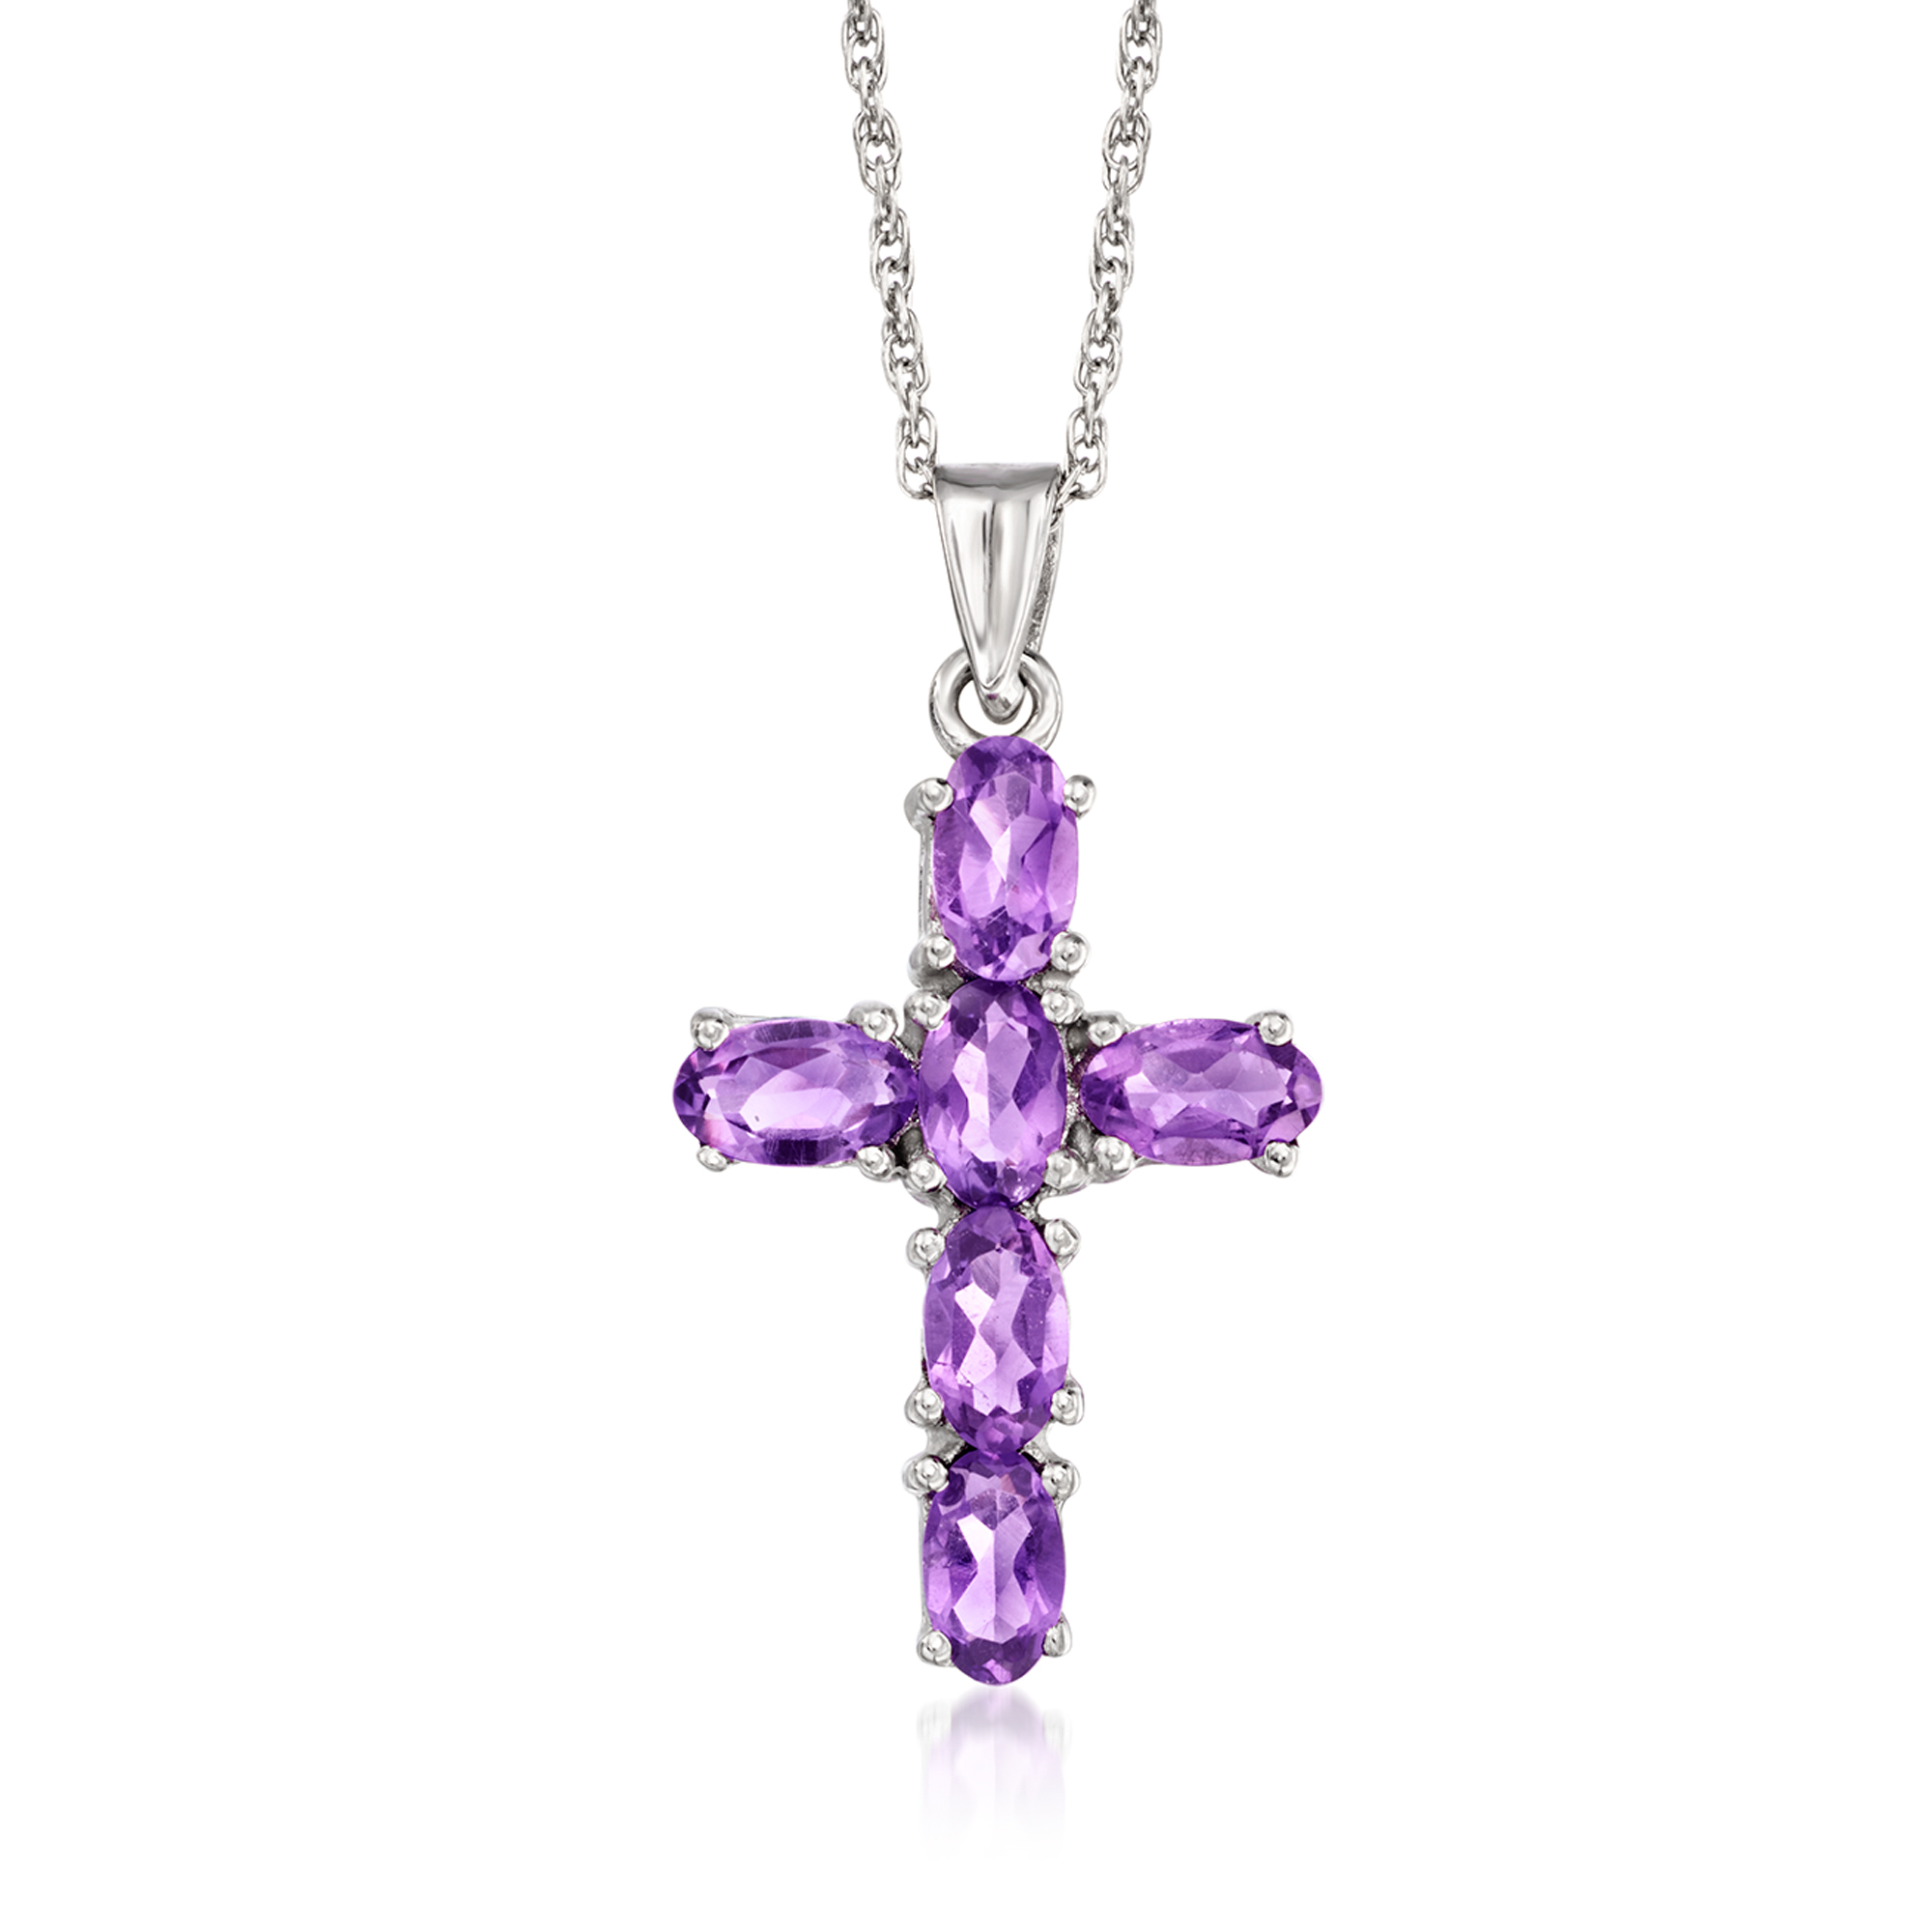 18-Inch Hamilton Gold Plated Necklace with 6mm Light Amethyst Birthstone Beads and Gold Filled Crucifix Charm. 